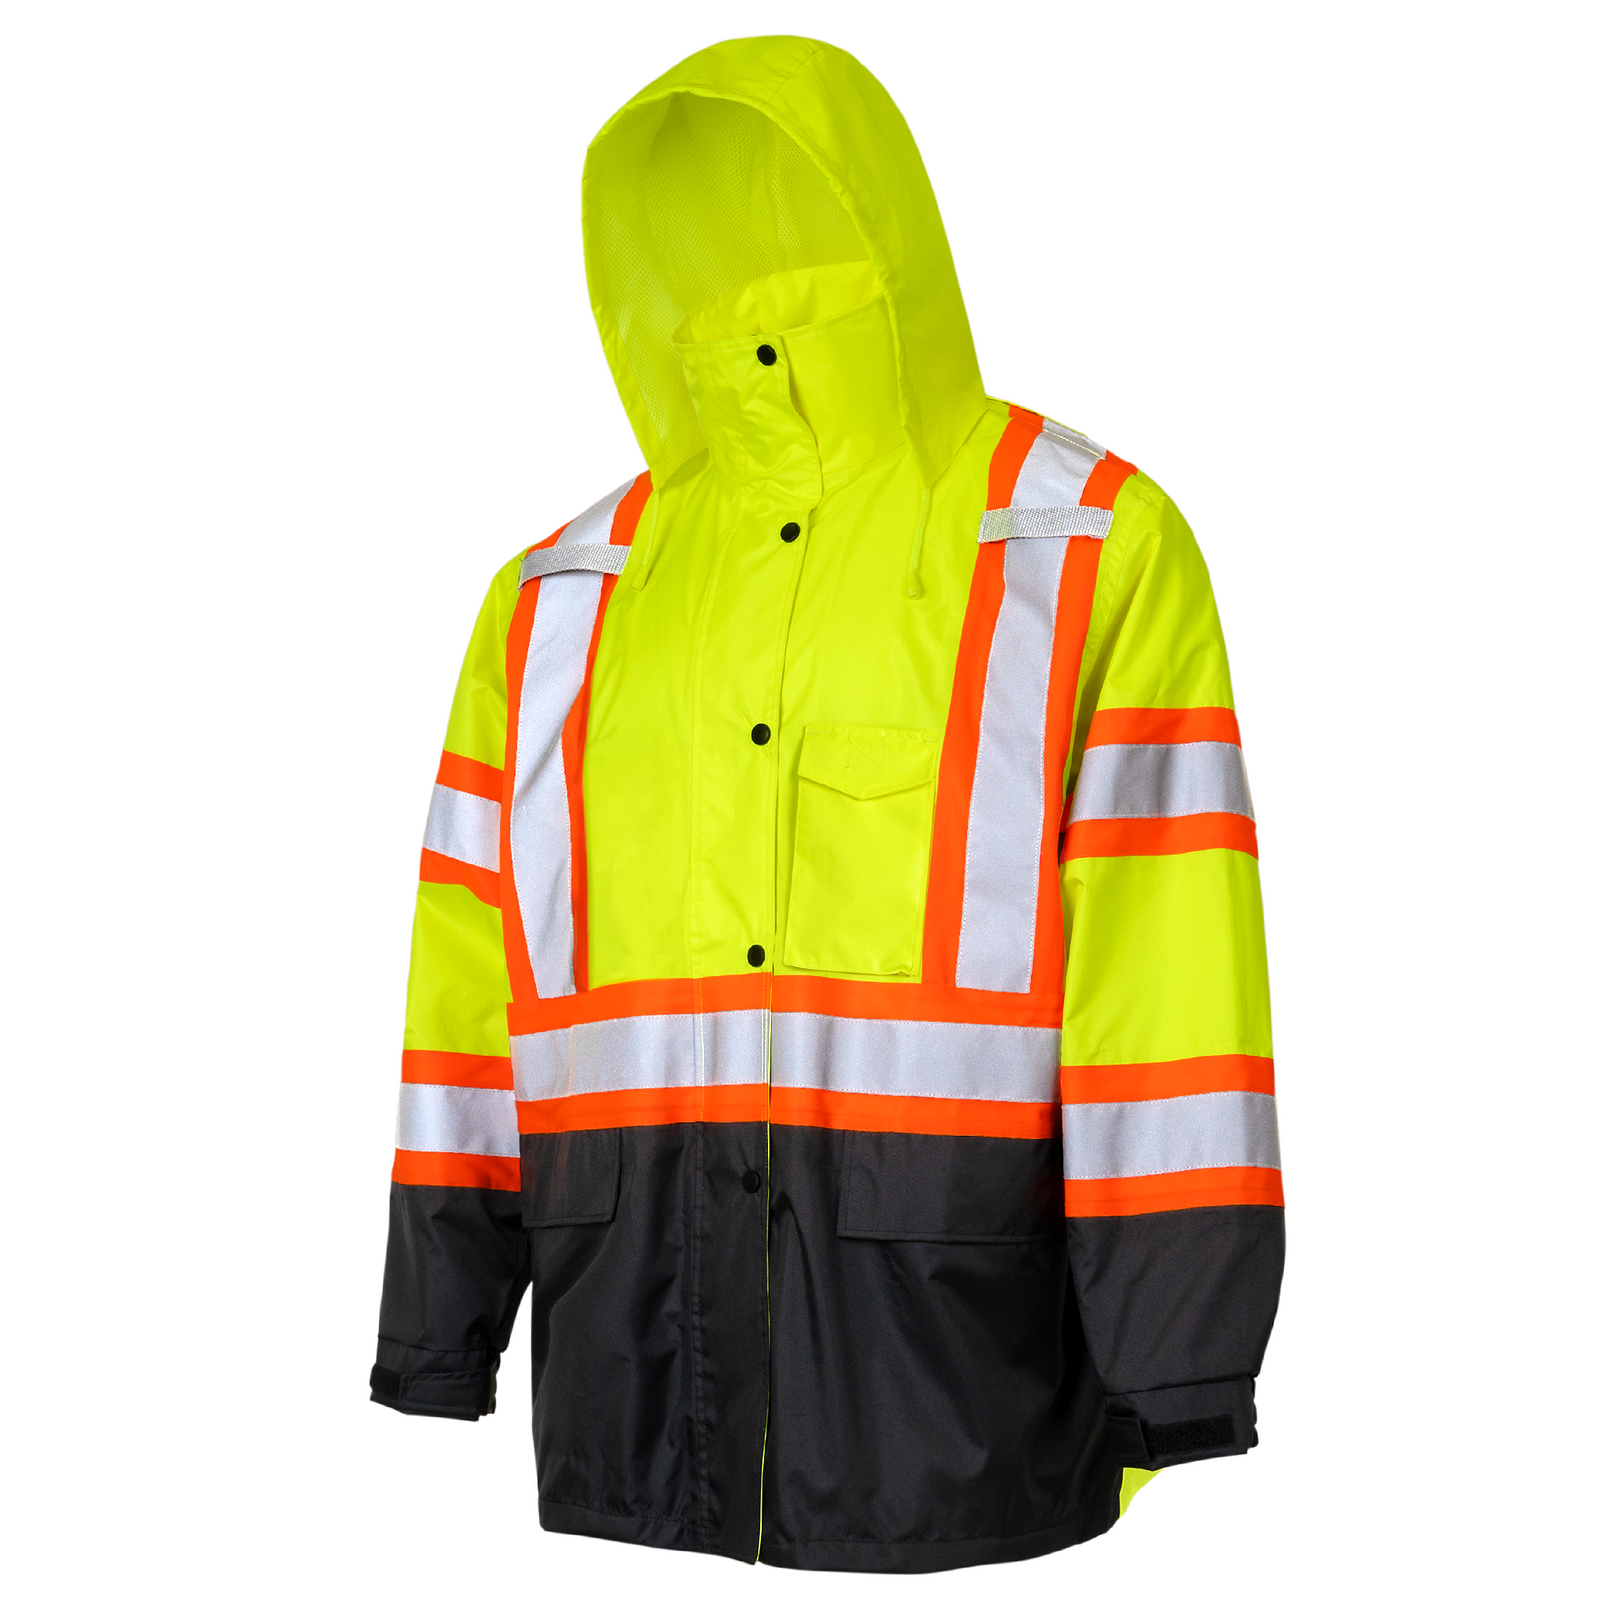 High visibility two tone safety rain jacket with X reflective stripes and hoodie